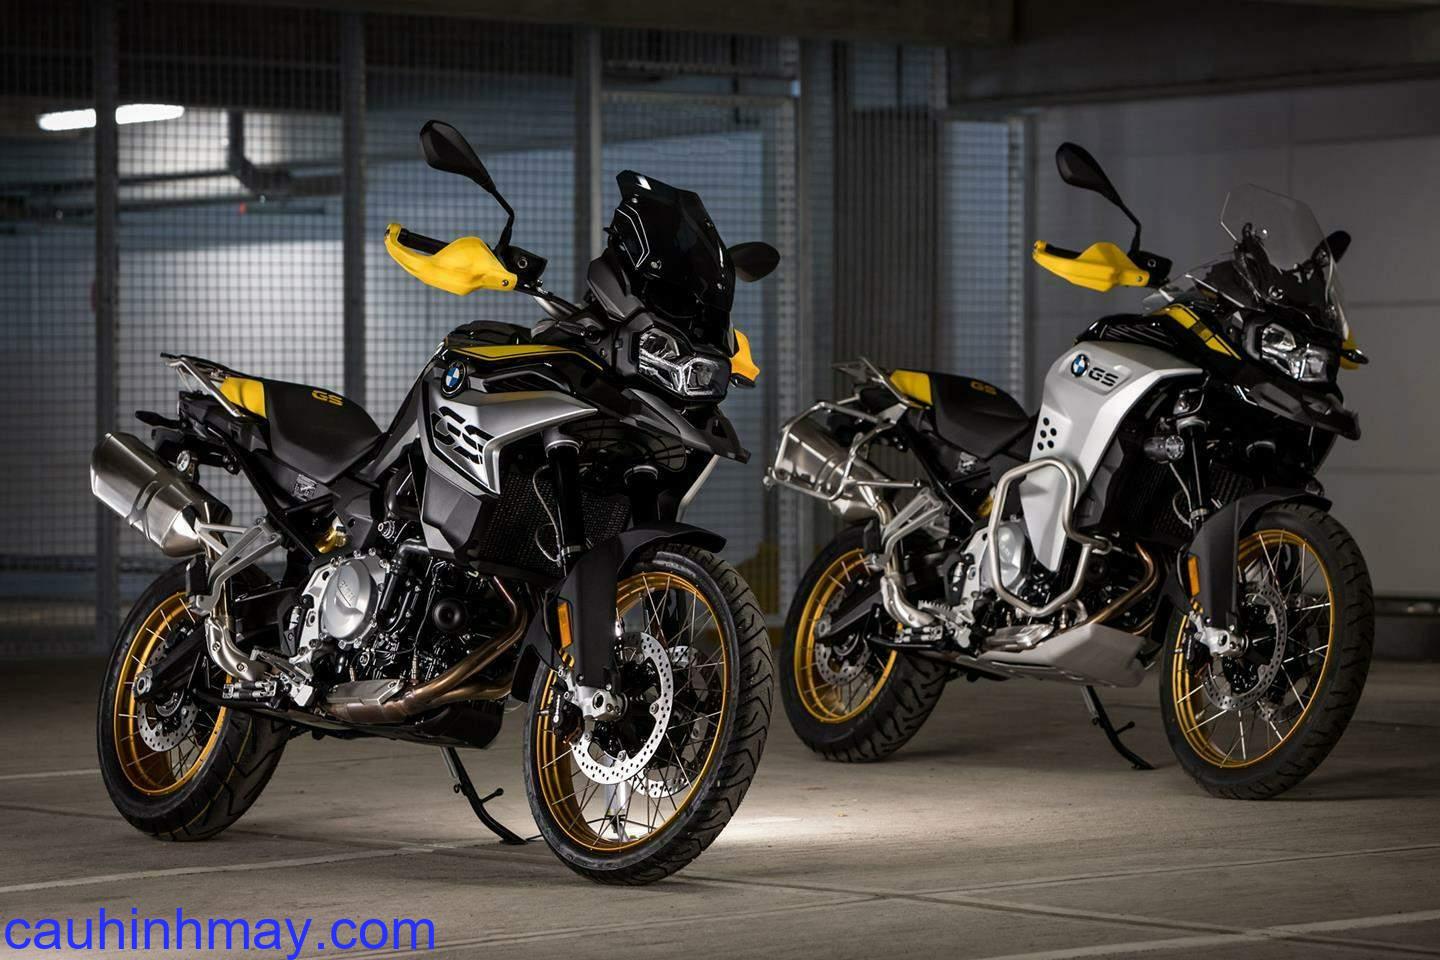 BMW F 850GS 40 YEARS EDITION - cauhinhmay.com